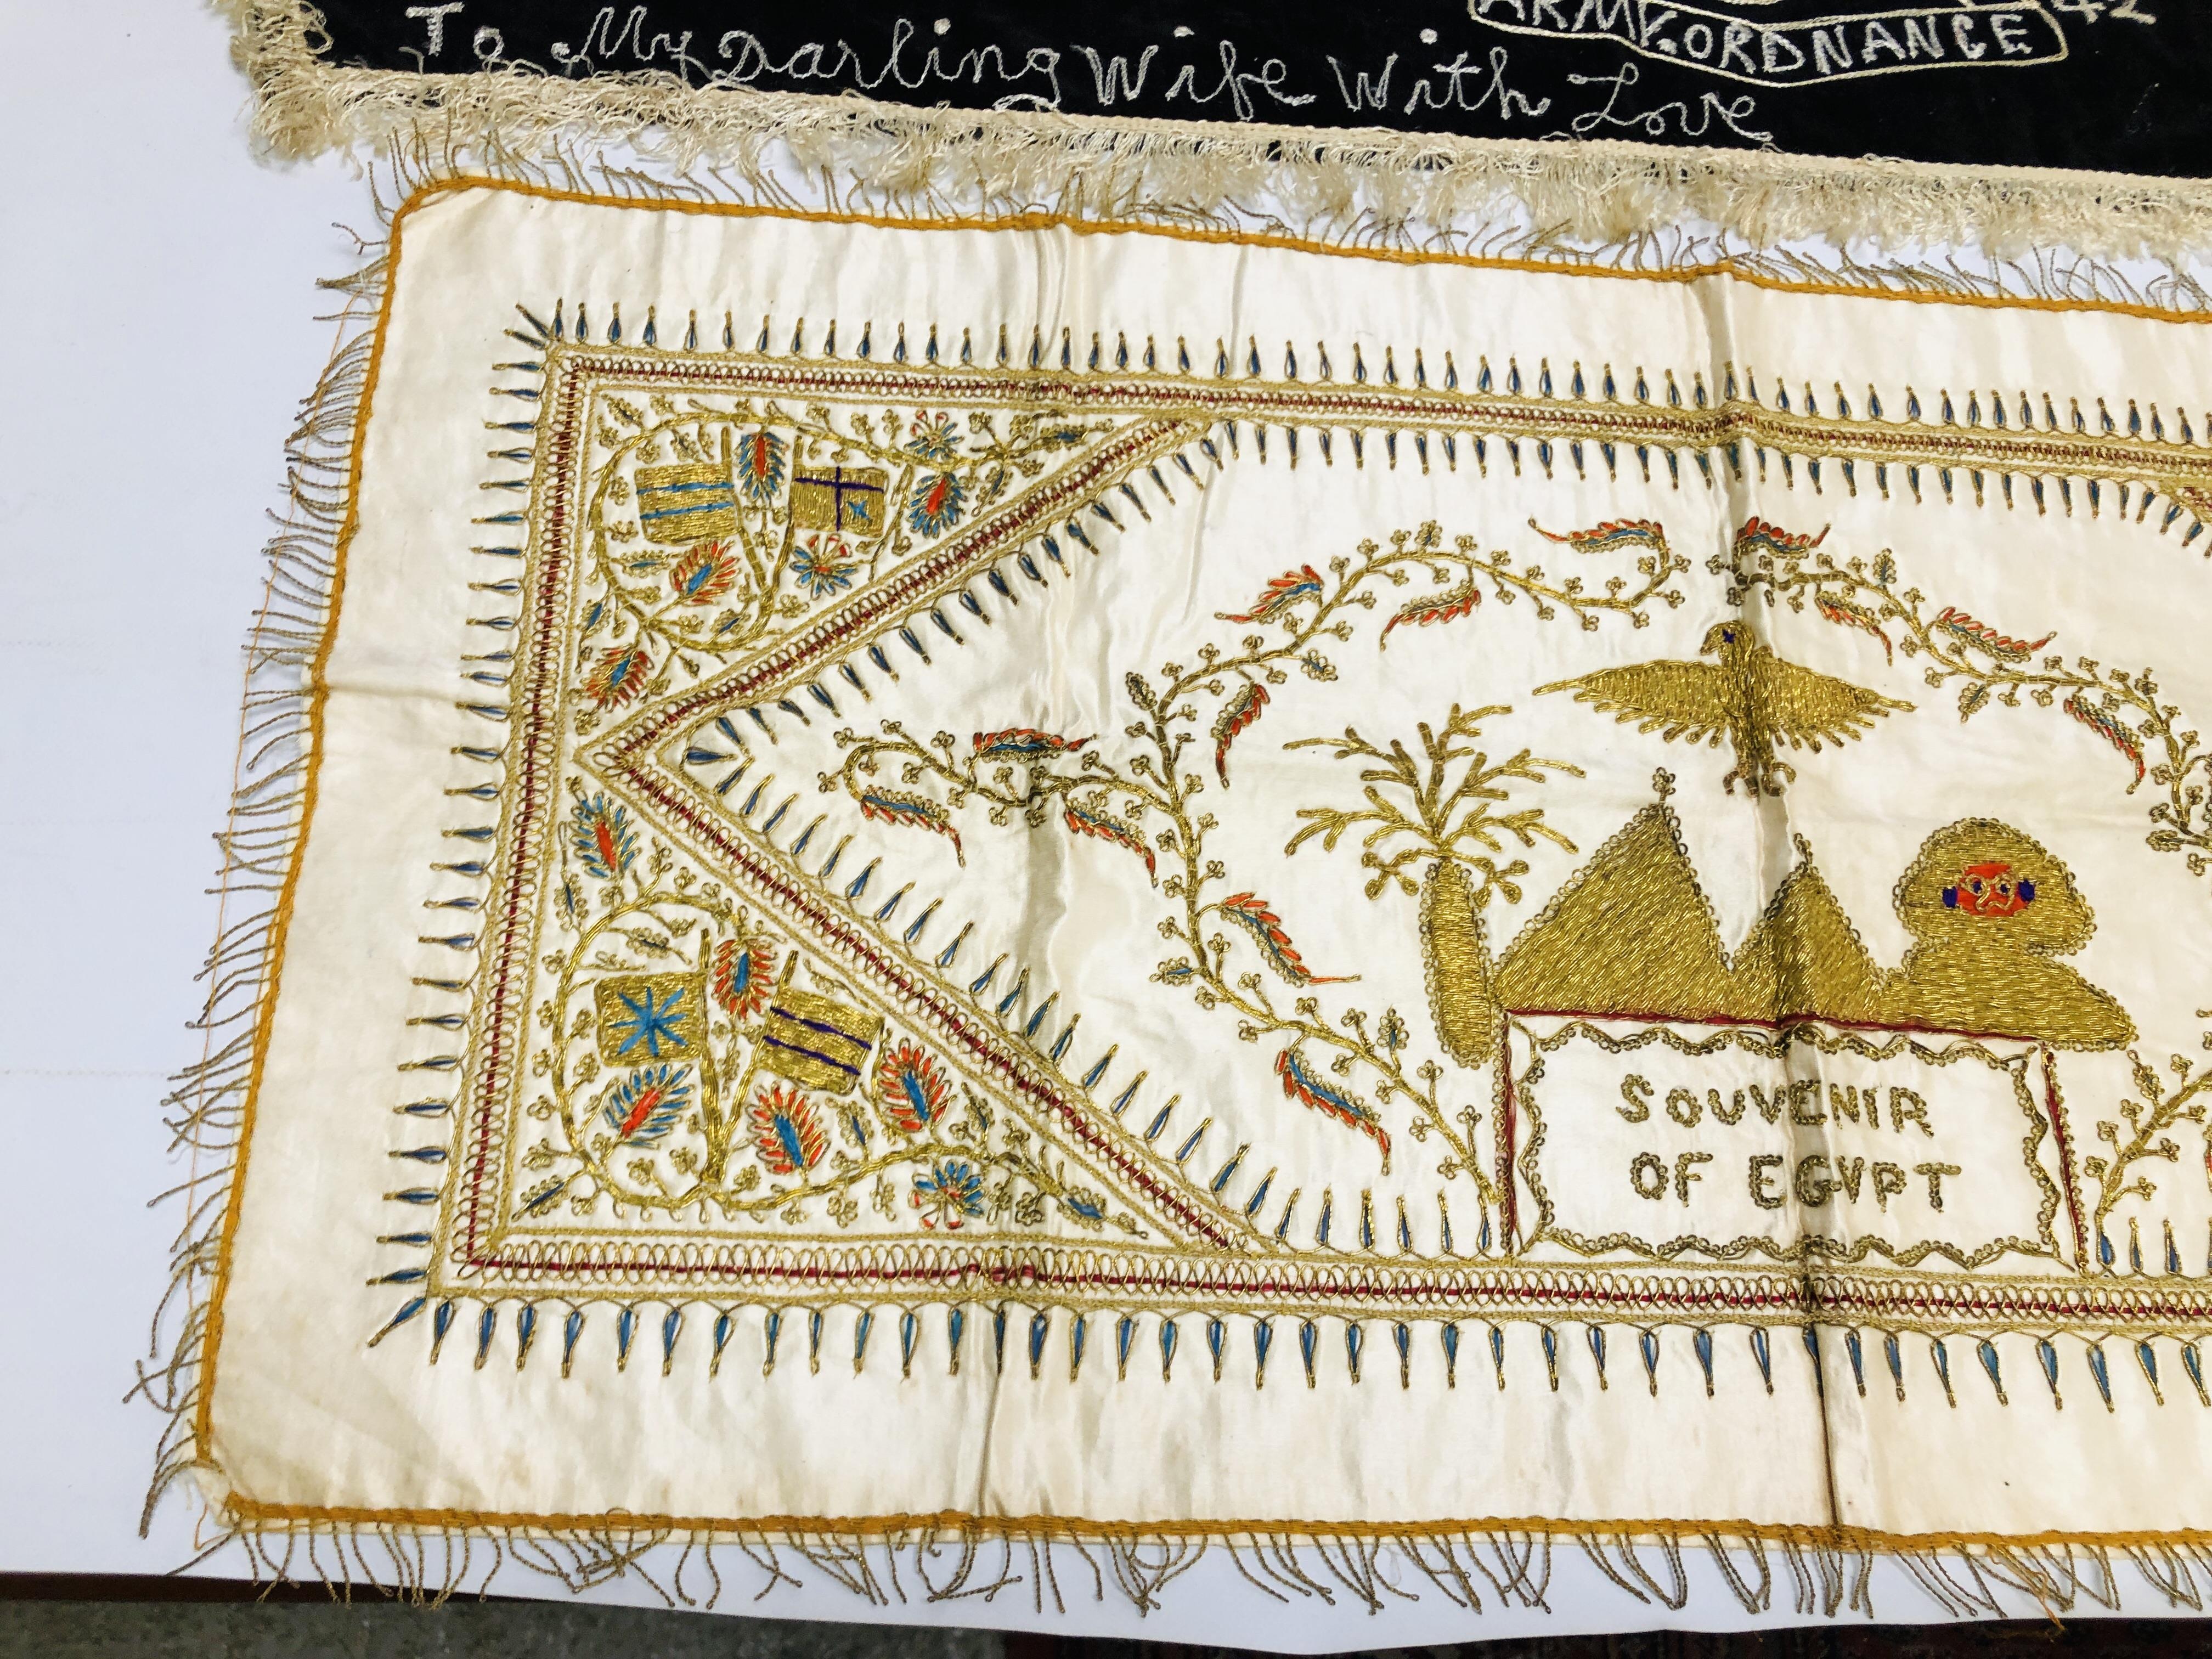 TWO SOUVENIR NEEDLEWORK PANELS, RELATING TO EGYPT, ONE INSCRIBED "ROYAL ORDNANCE...1942". - Image 6 of 9